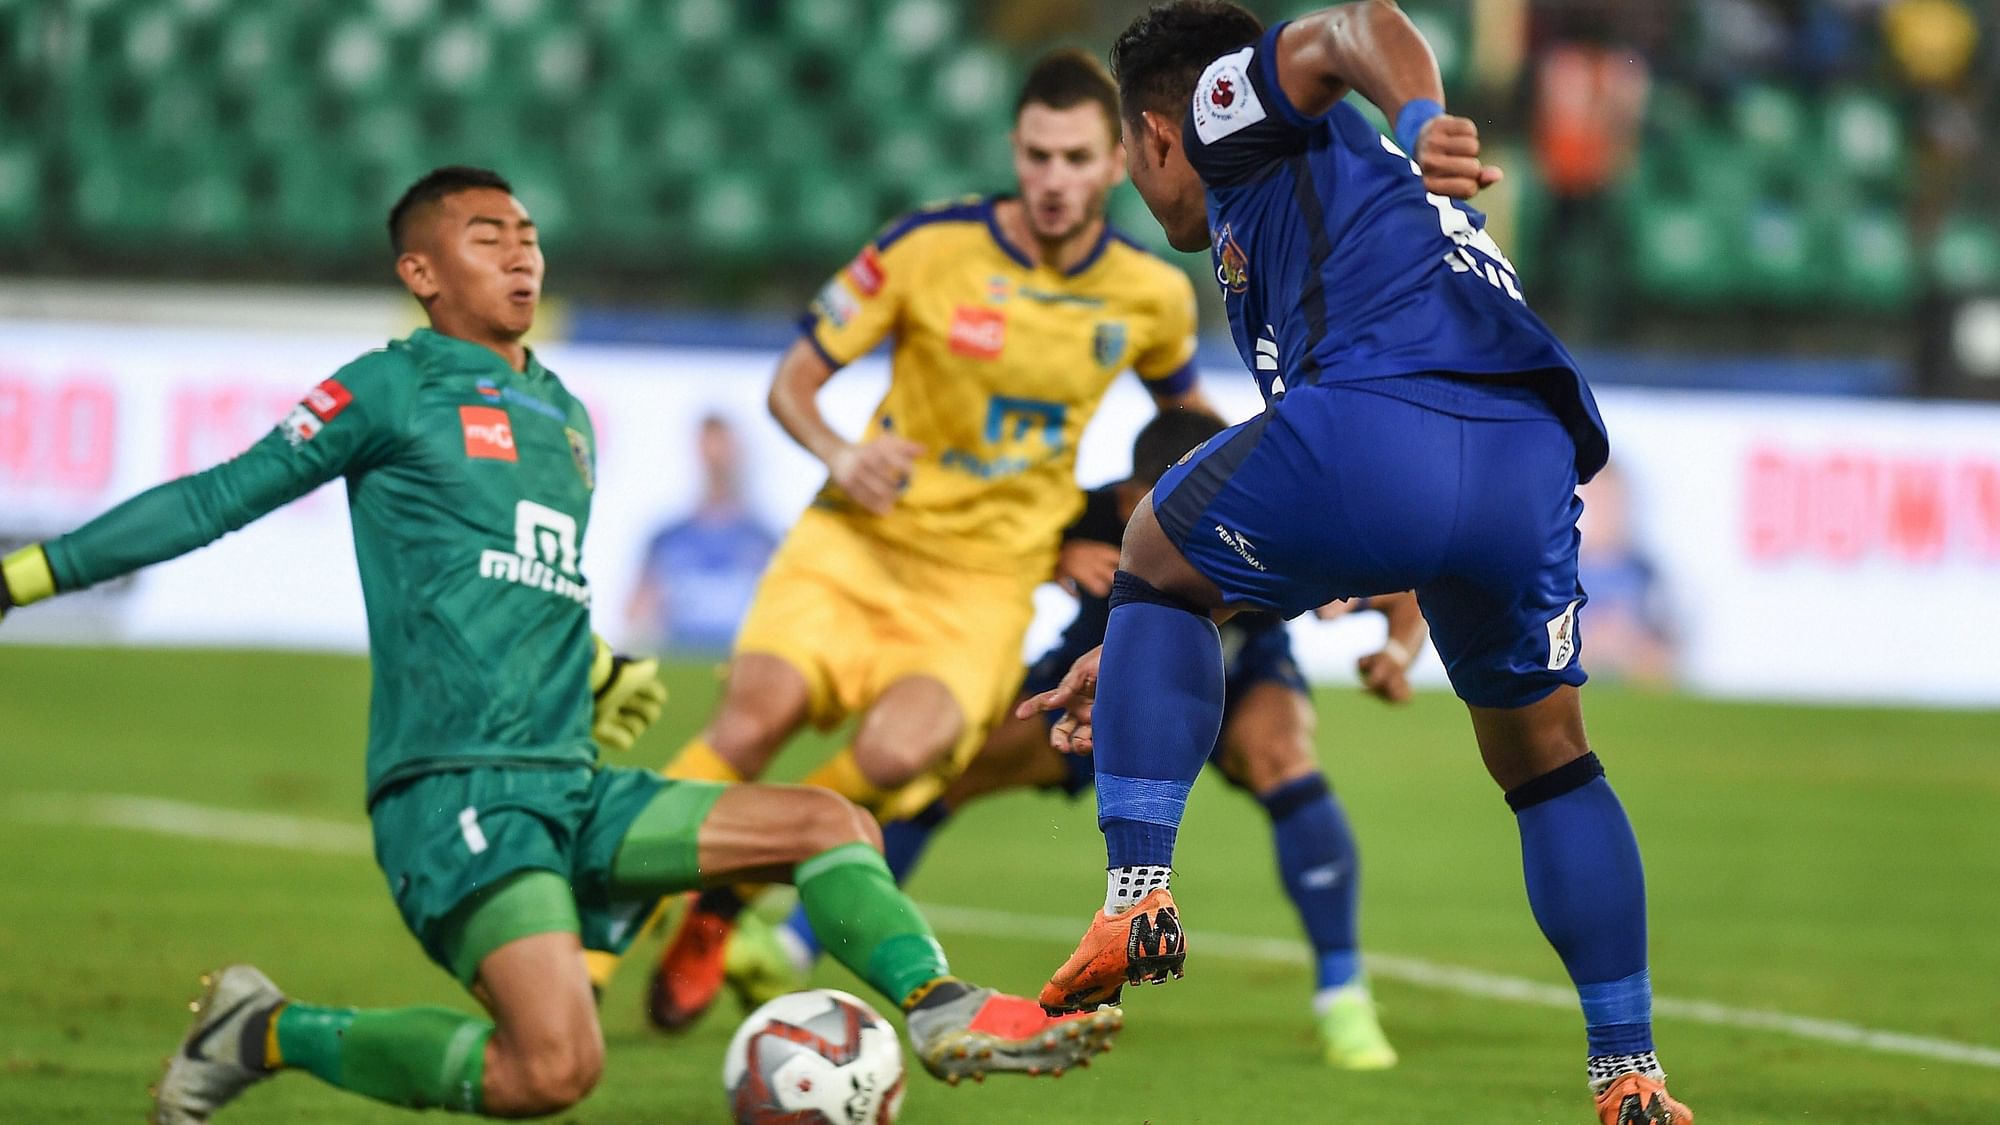 Chennaiyin FC (blue kit) played out a 0-0 draw with Kerala Blasters (yellow and green) in the Indian Super League.